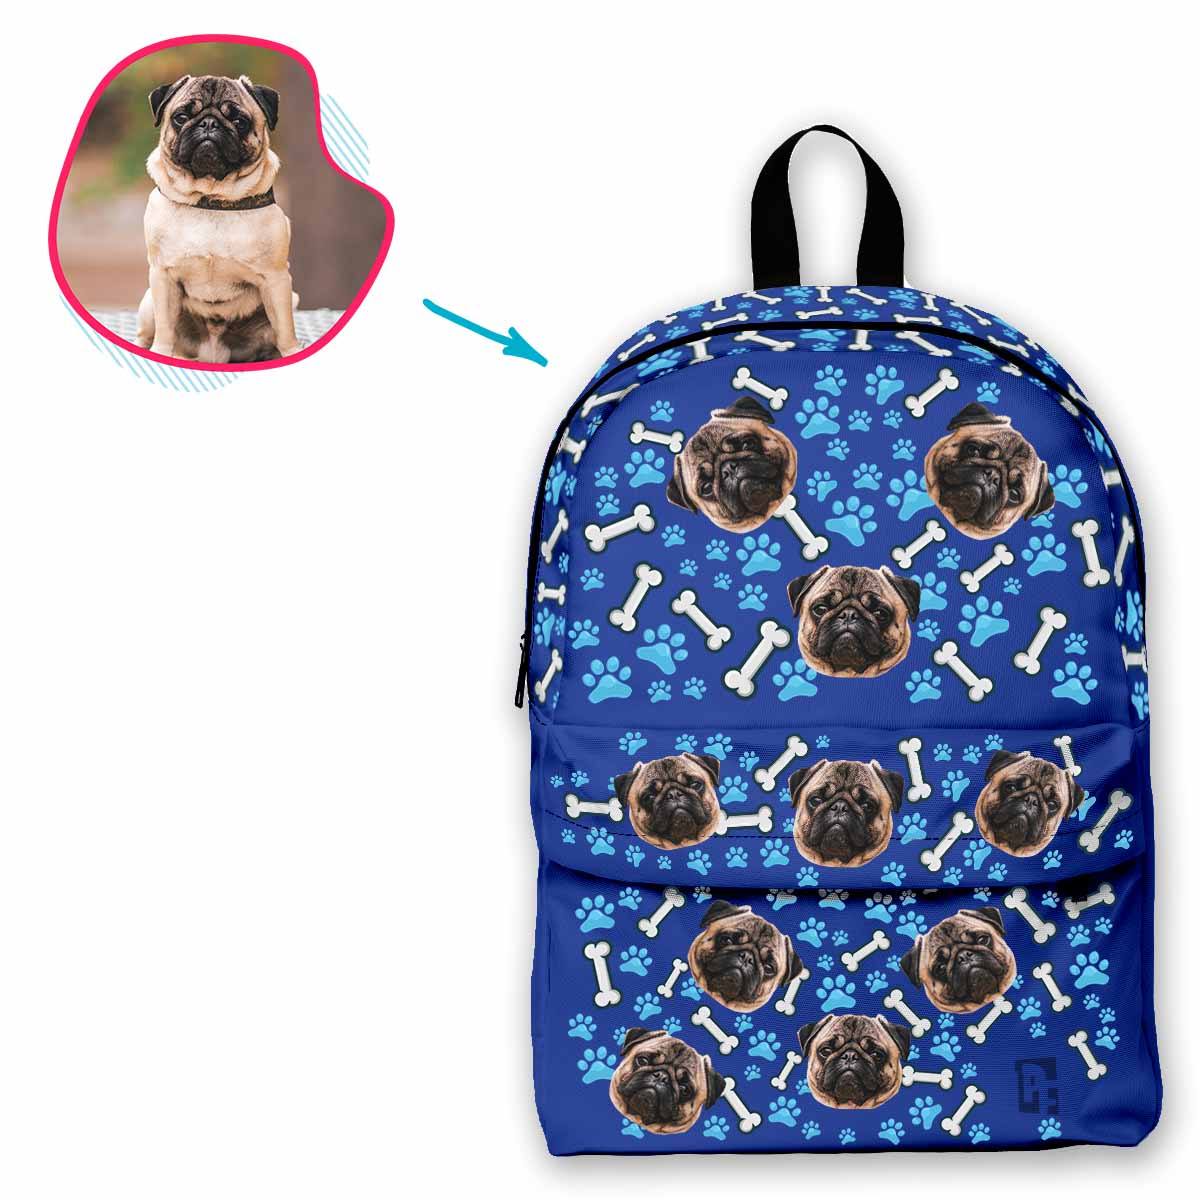 darkblue Dog classic backpack personalized with photo of face printed on it